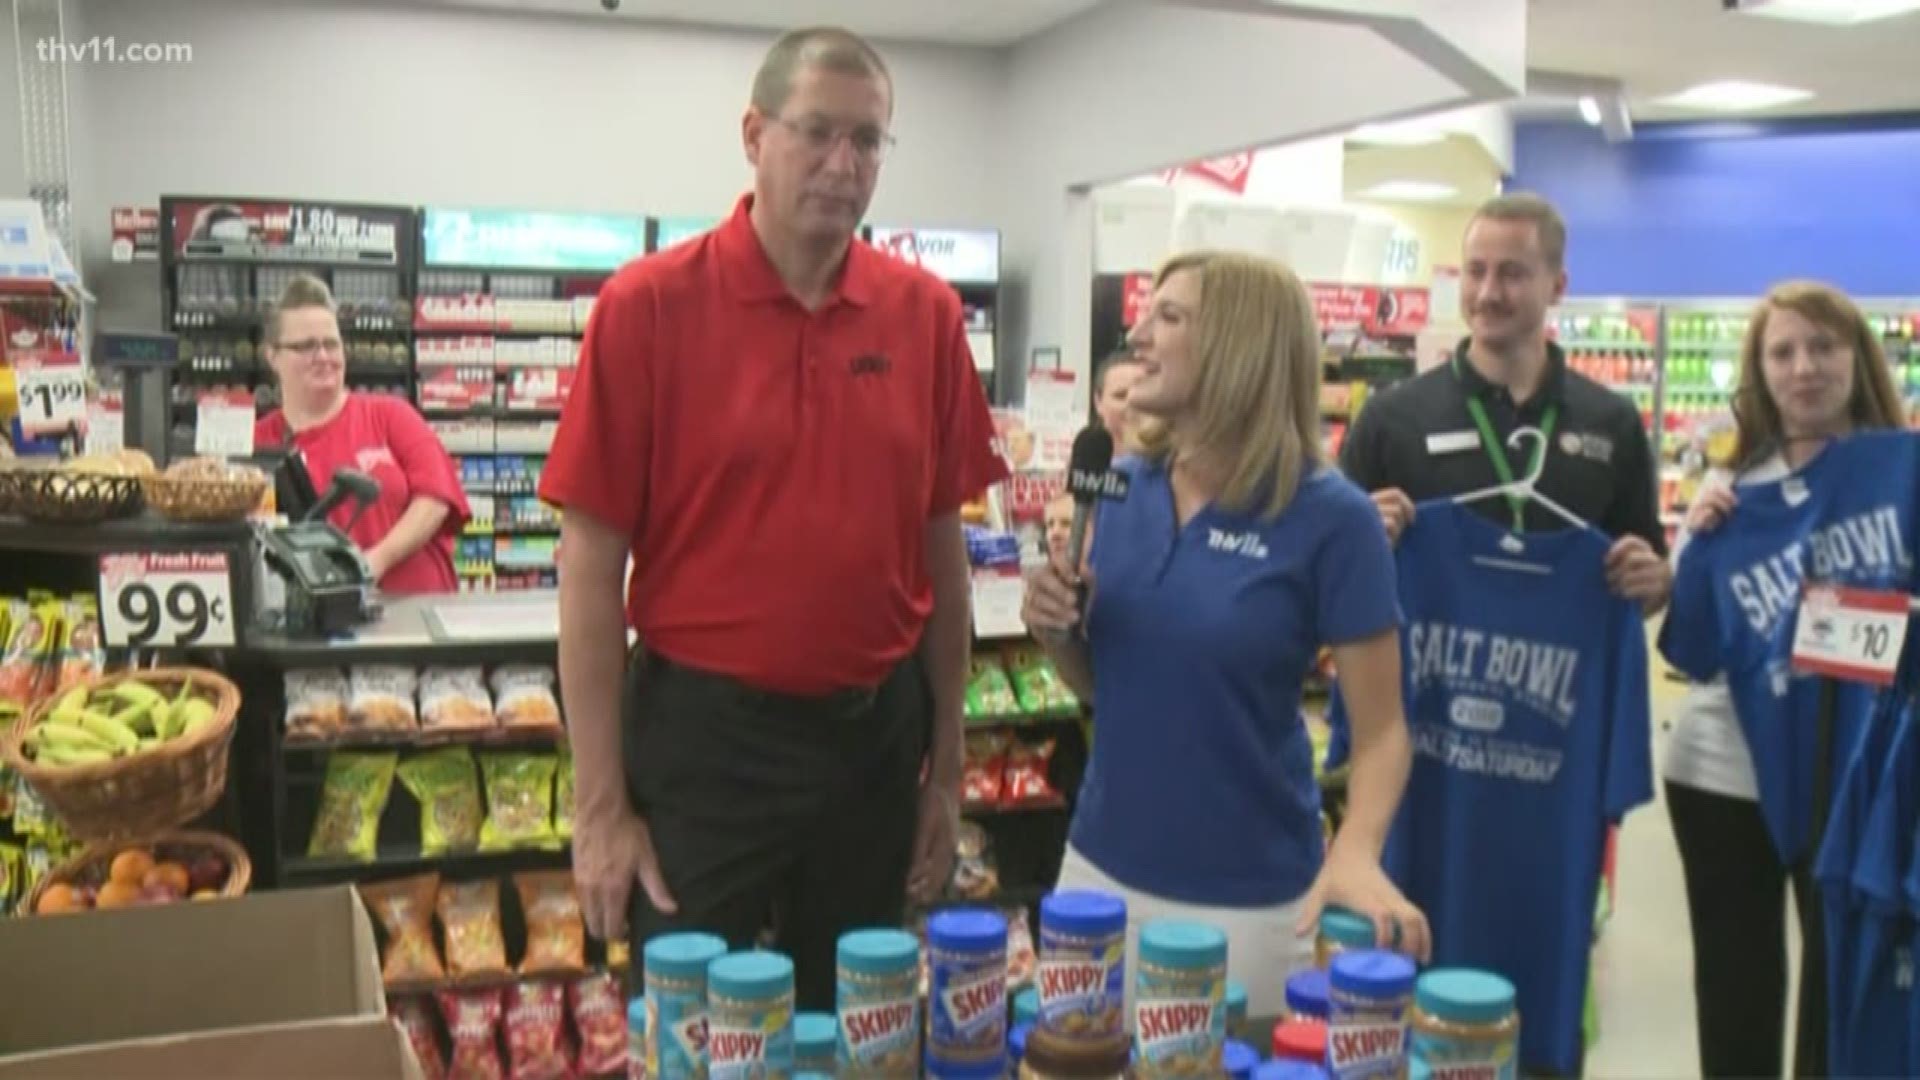 Skippy Foods helps support the community through their partnership with the Arkansas Food Bank.